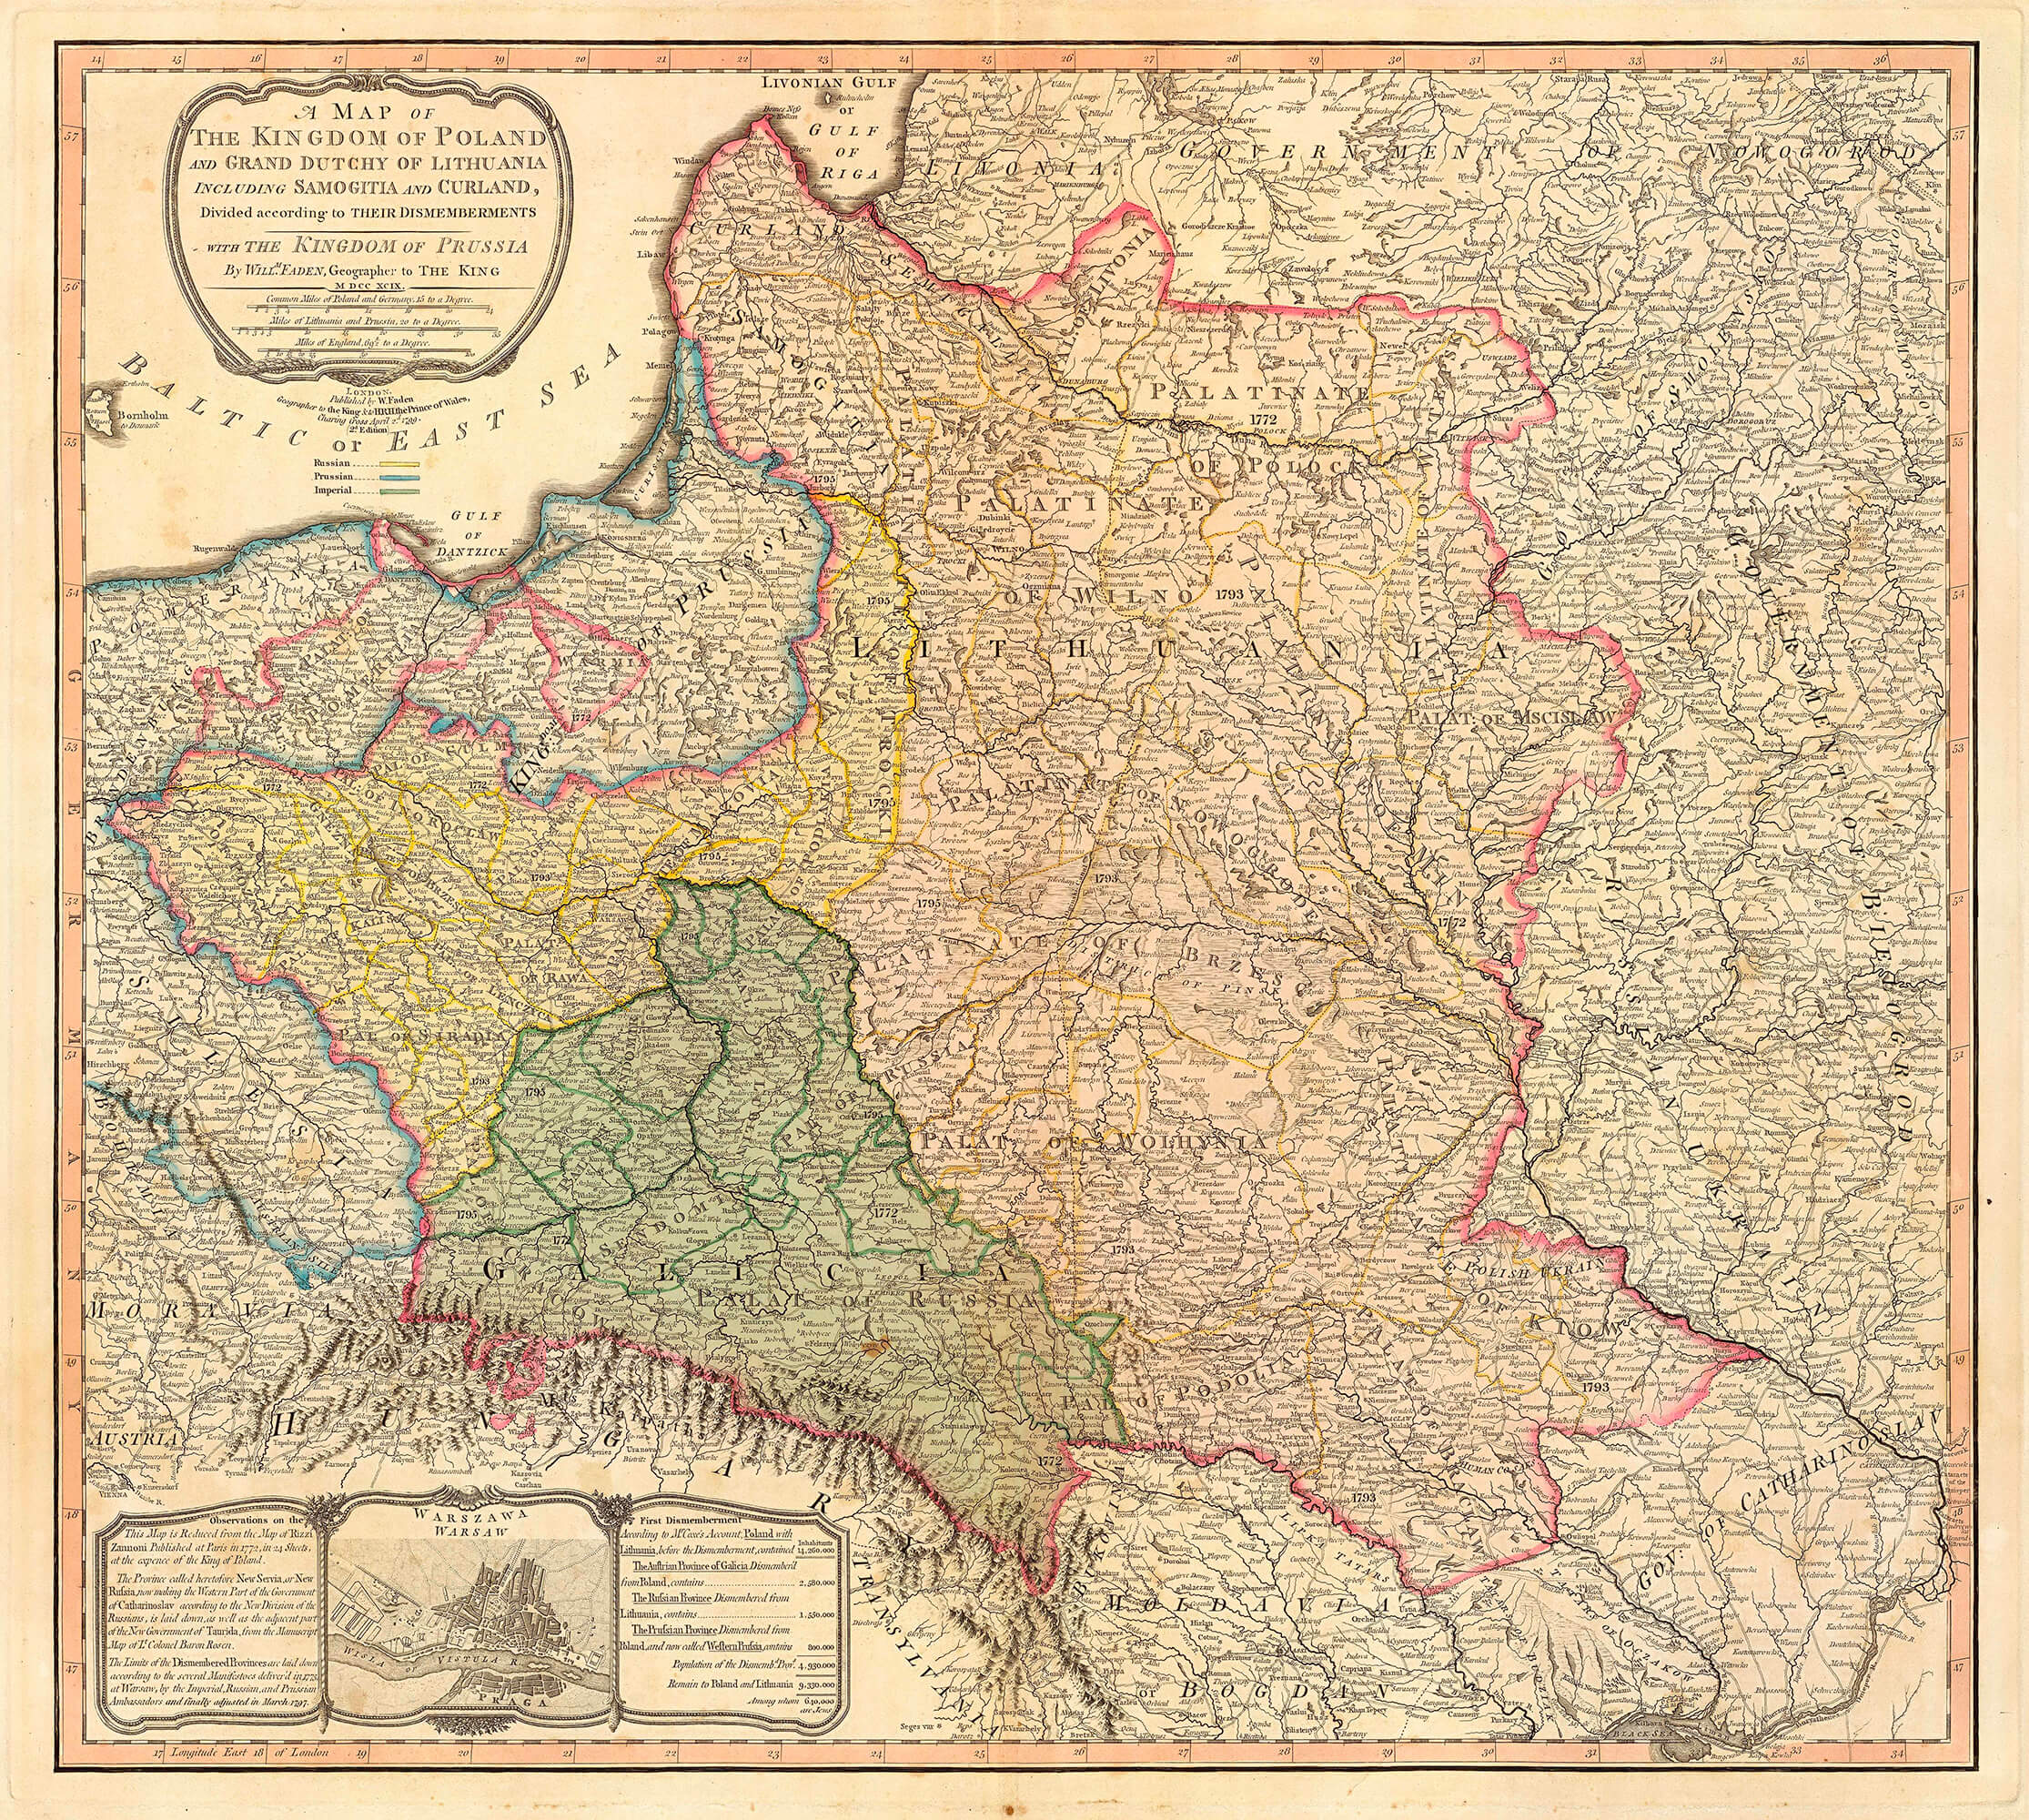 Partitions of Poland, map, late 18th century